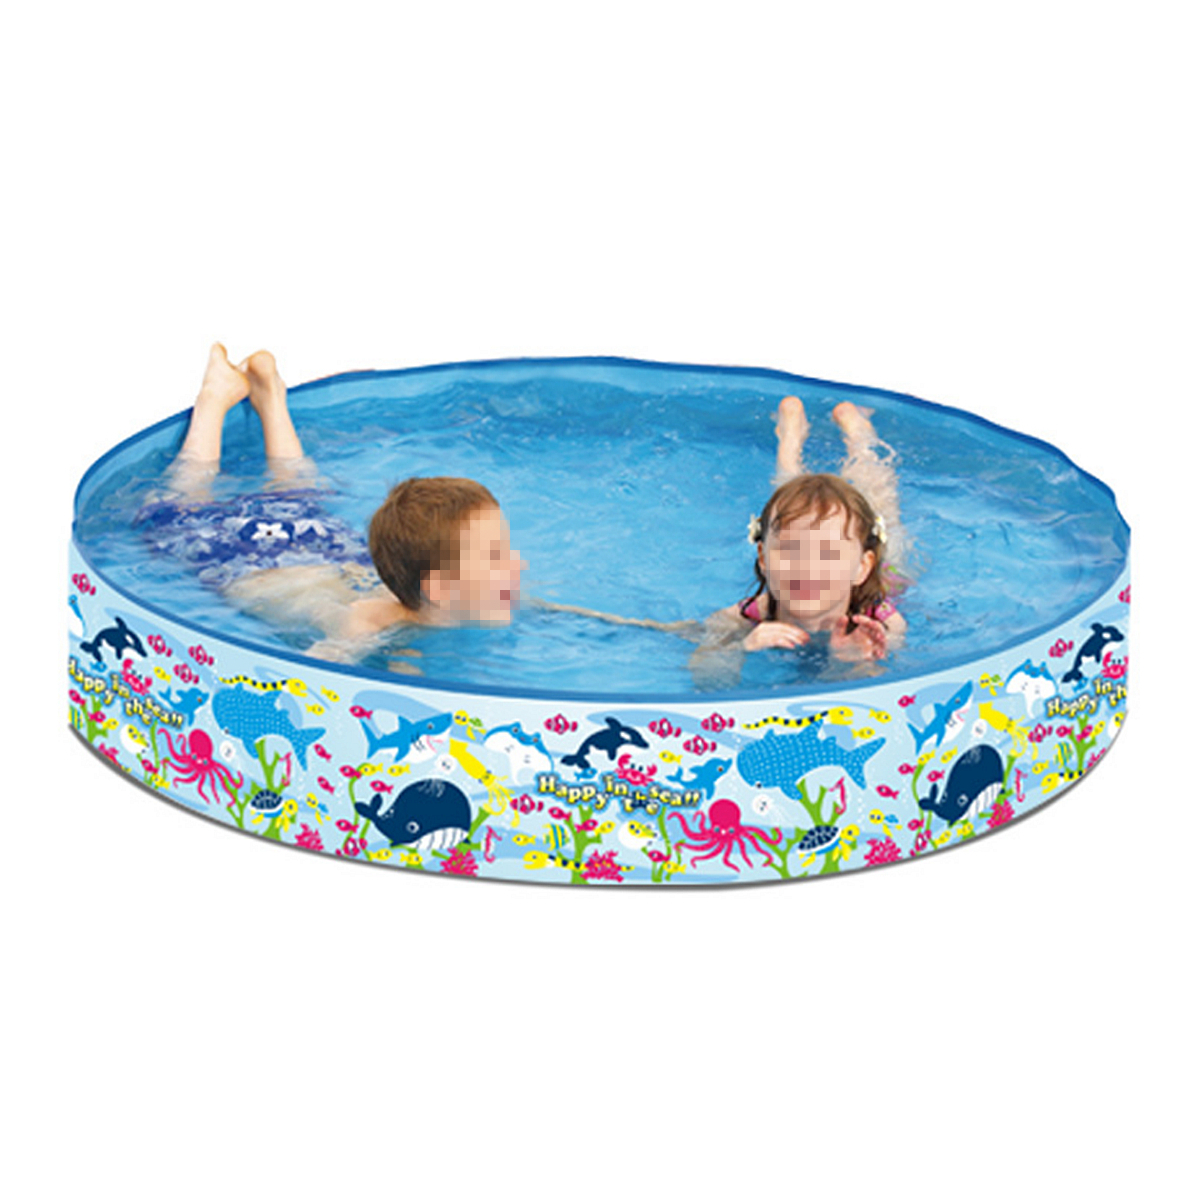 120150cm-Inflatable-Swimming-Pool-Family-Outdoor-Garden-Kid-Play-Bathtub-1697943-6